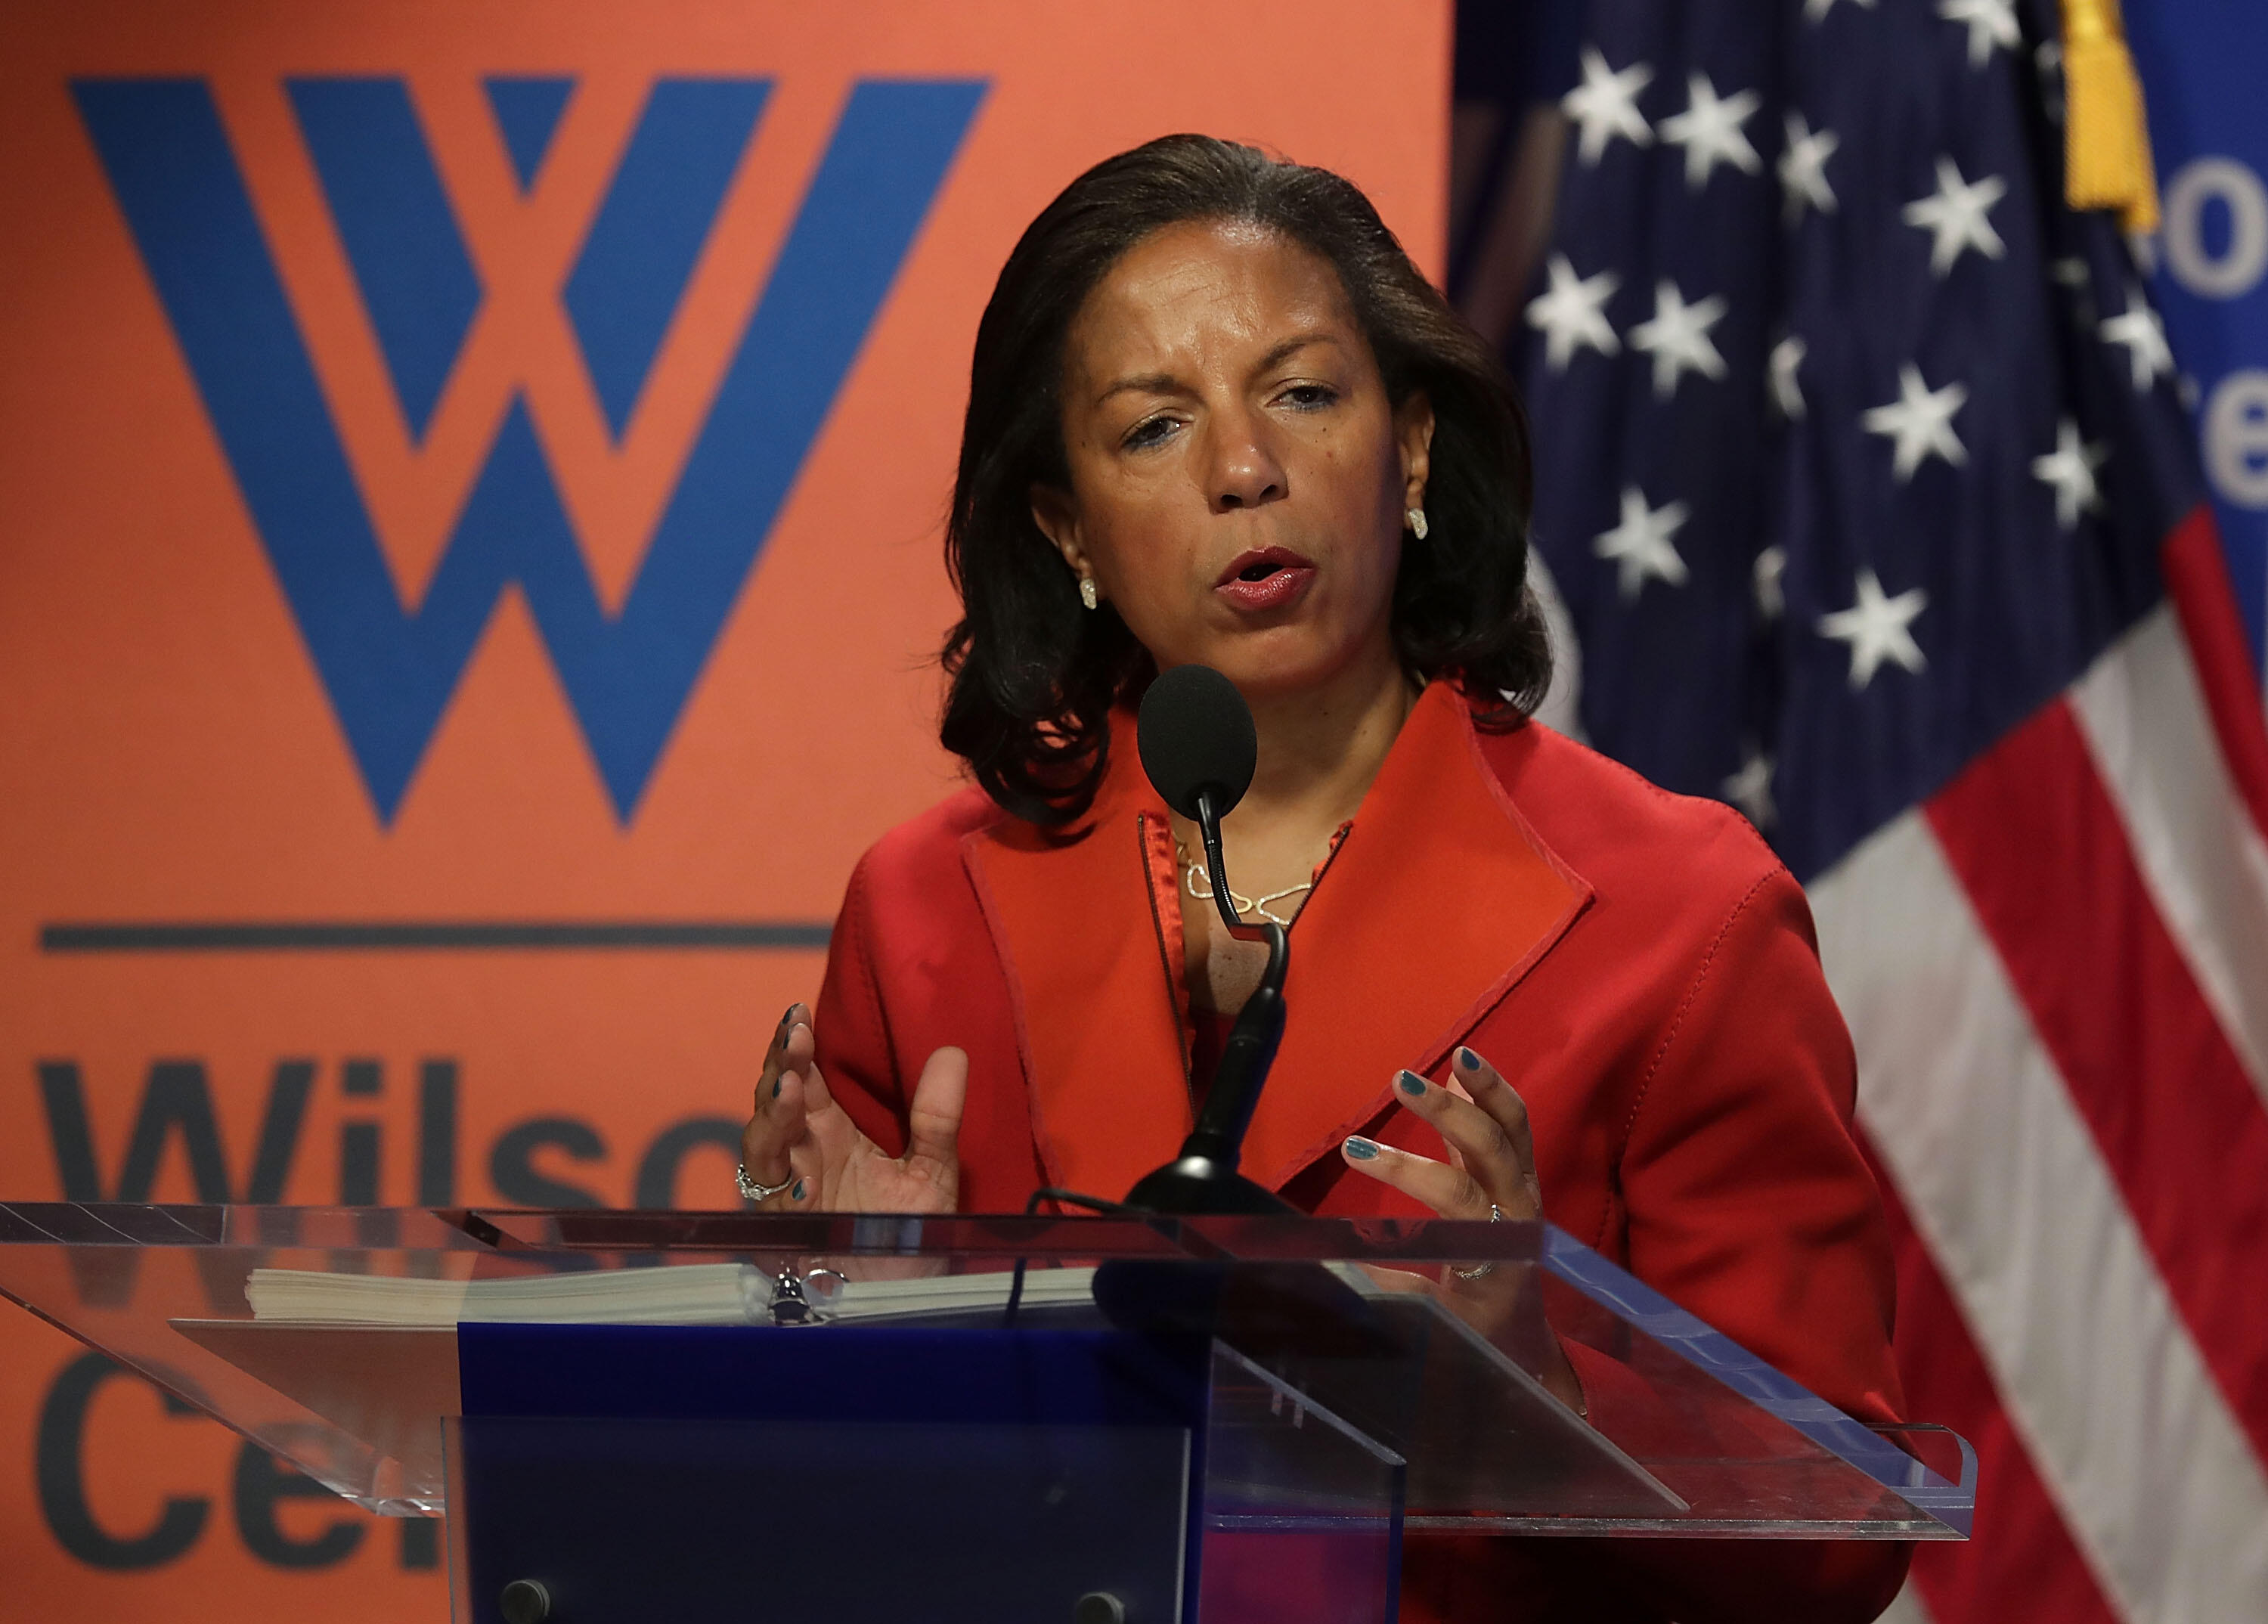 WASHINGTON, DC - OCTOBER 14:  National Security Advisor Susan Rice participates in a discussion October 14, 2016 at the Woodrow Wilson Center in Washington, DC. Rice discussed the Obama administration's approach to Cuba.  (Photo by Alex Wong/Getty Images)